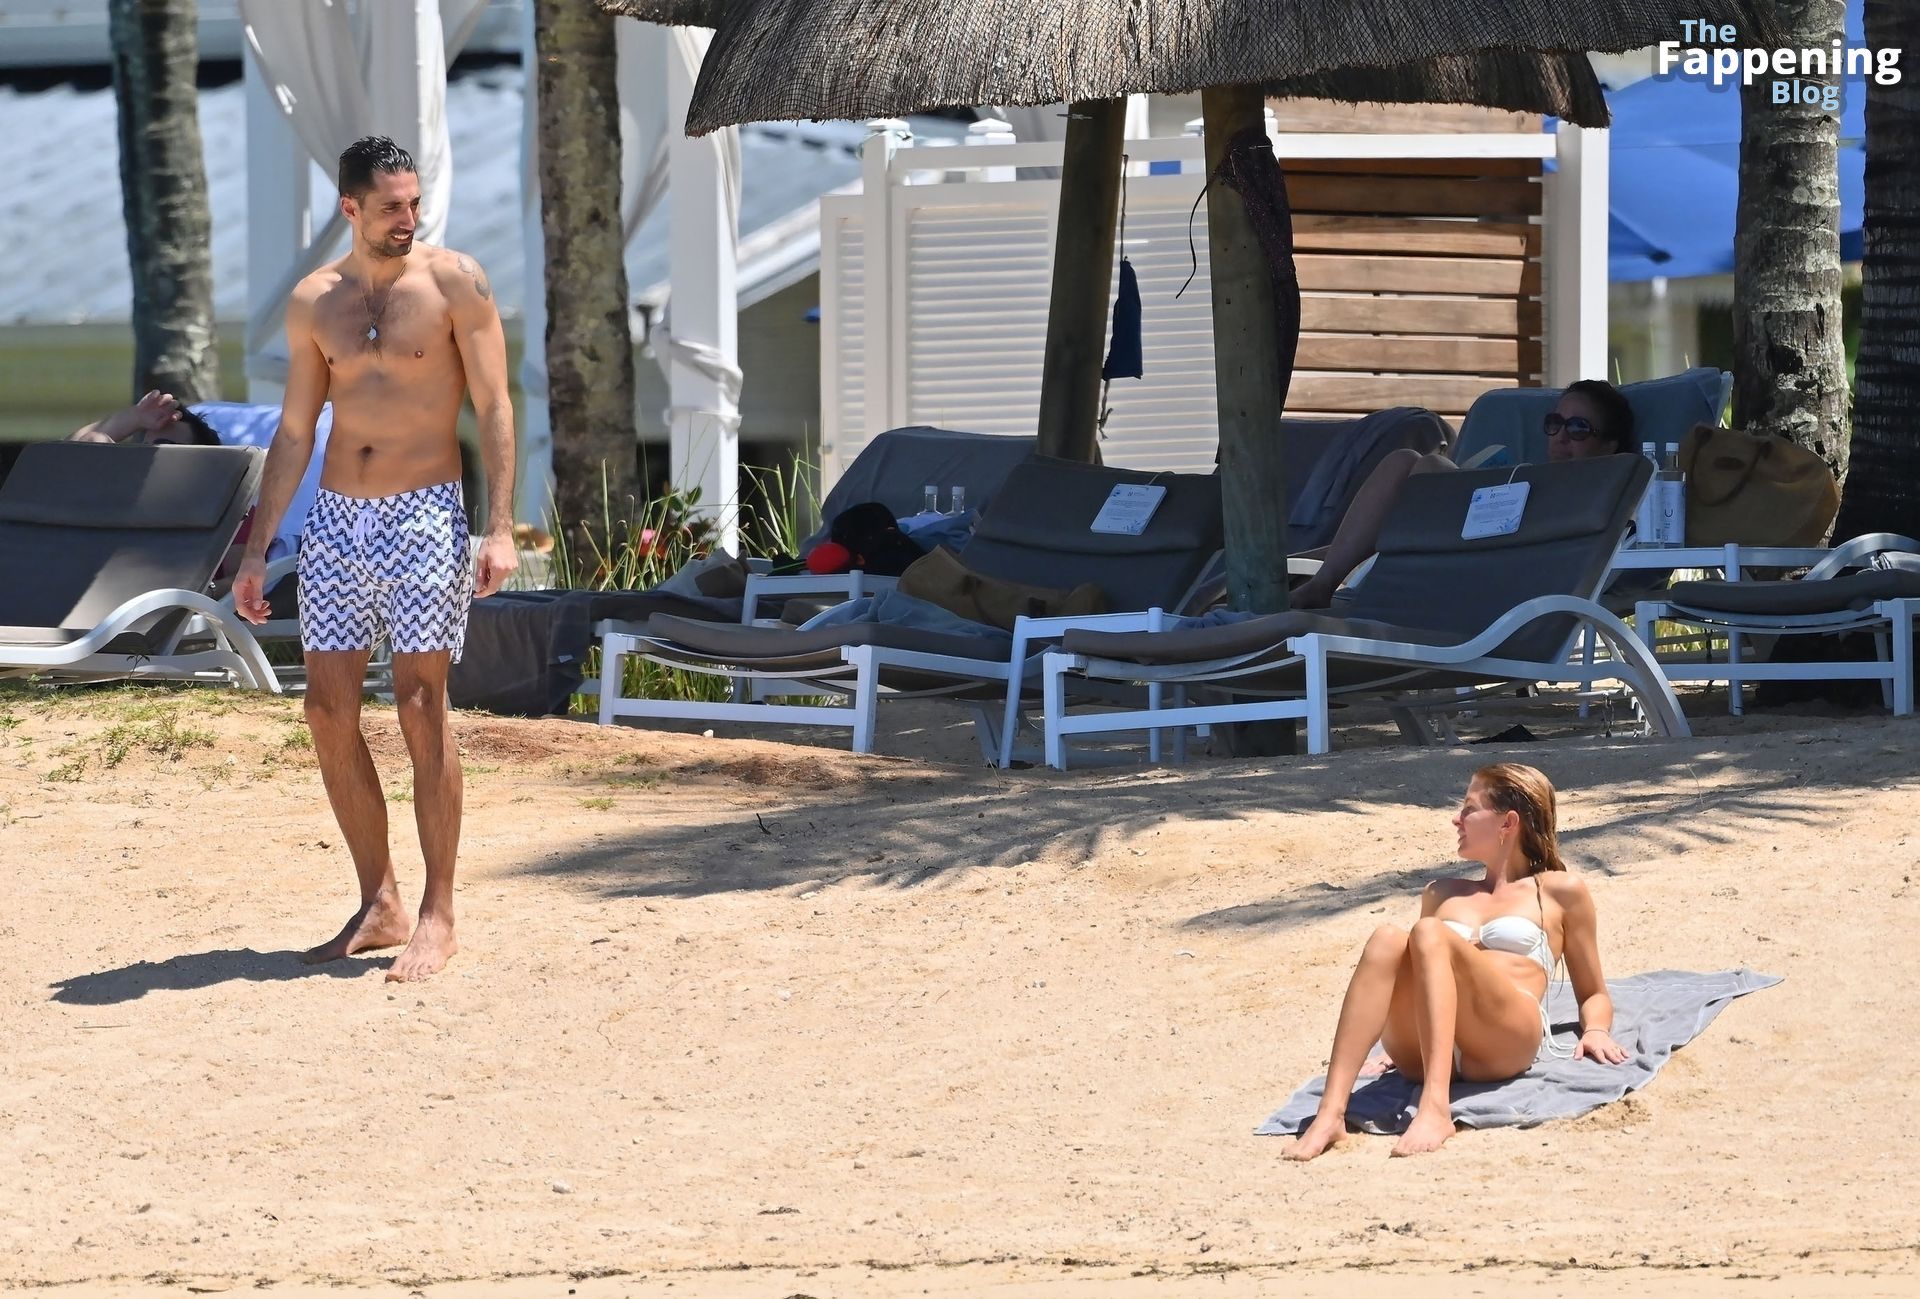 Millie Mackintosh &amp; Hugo Taylor are Seen Soaking Up the Sunshine During Their Winter Break Out in Mauritius (27 Photos)